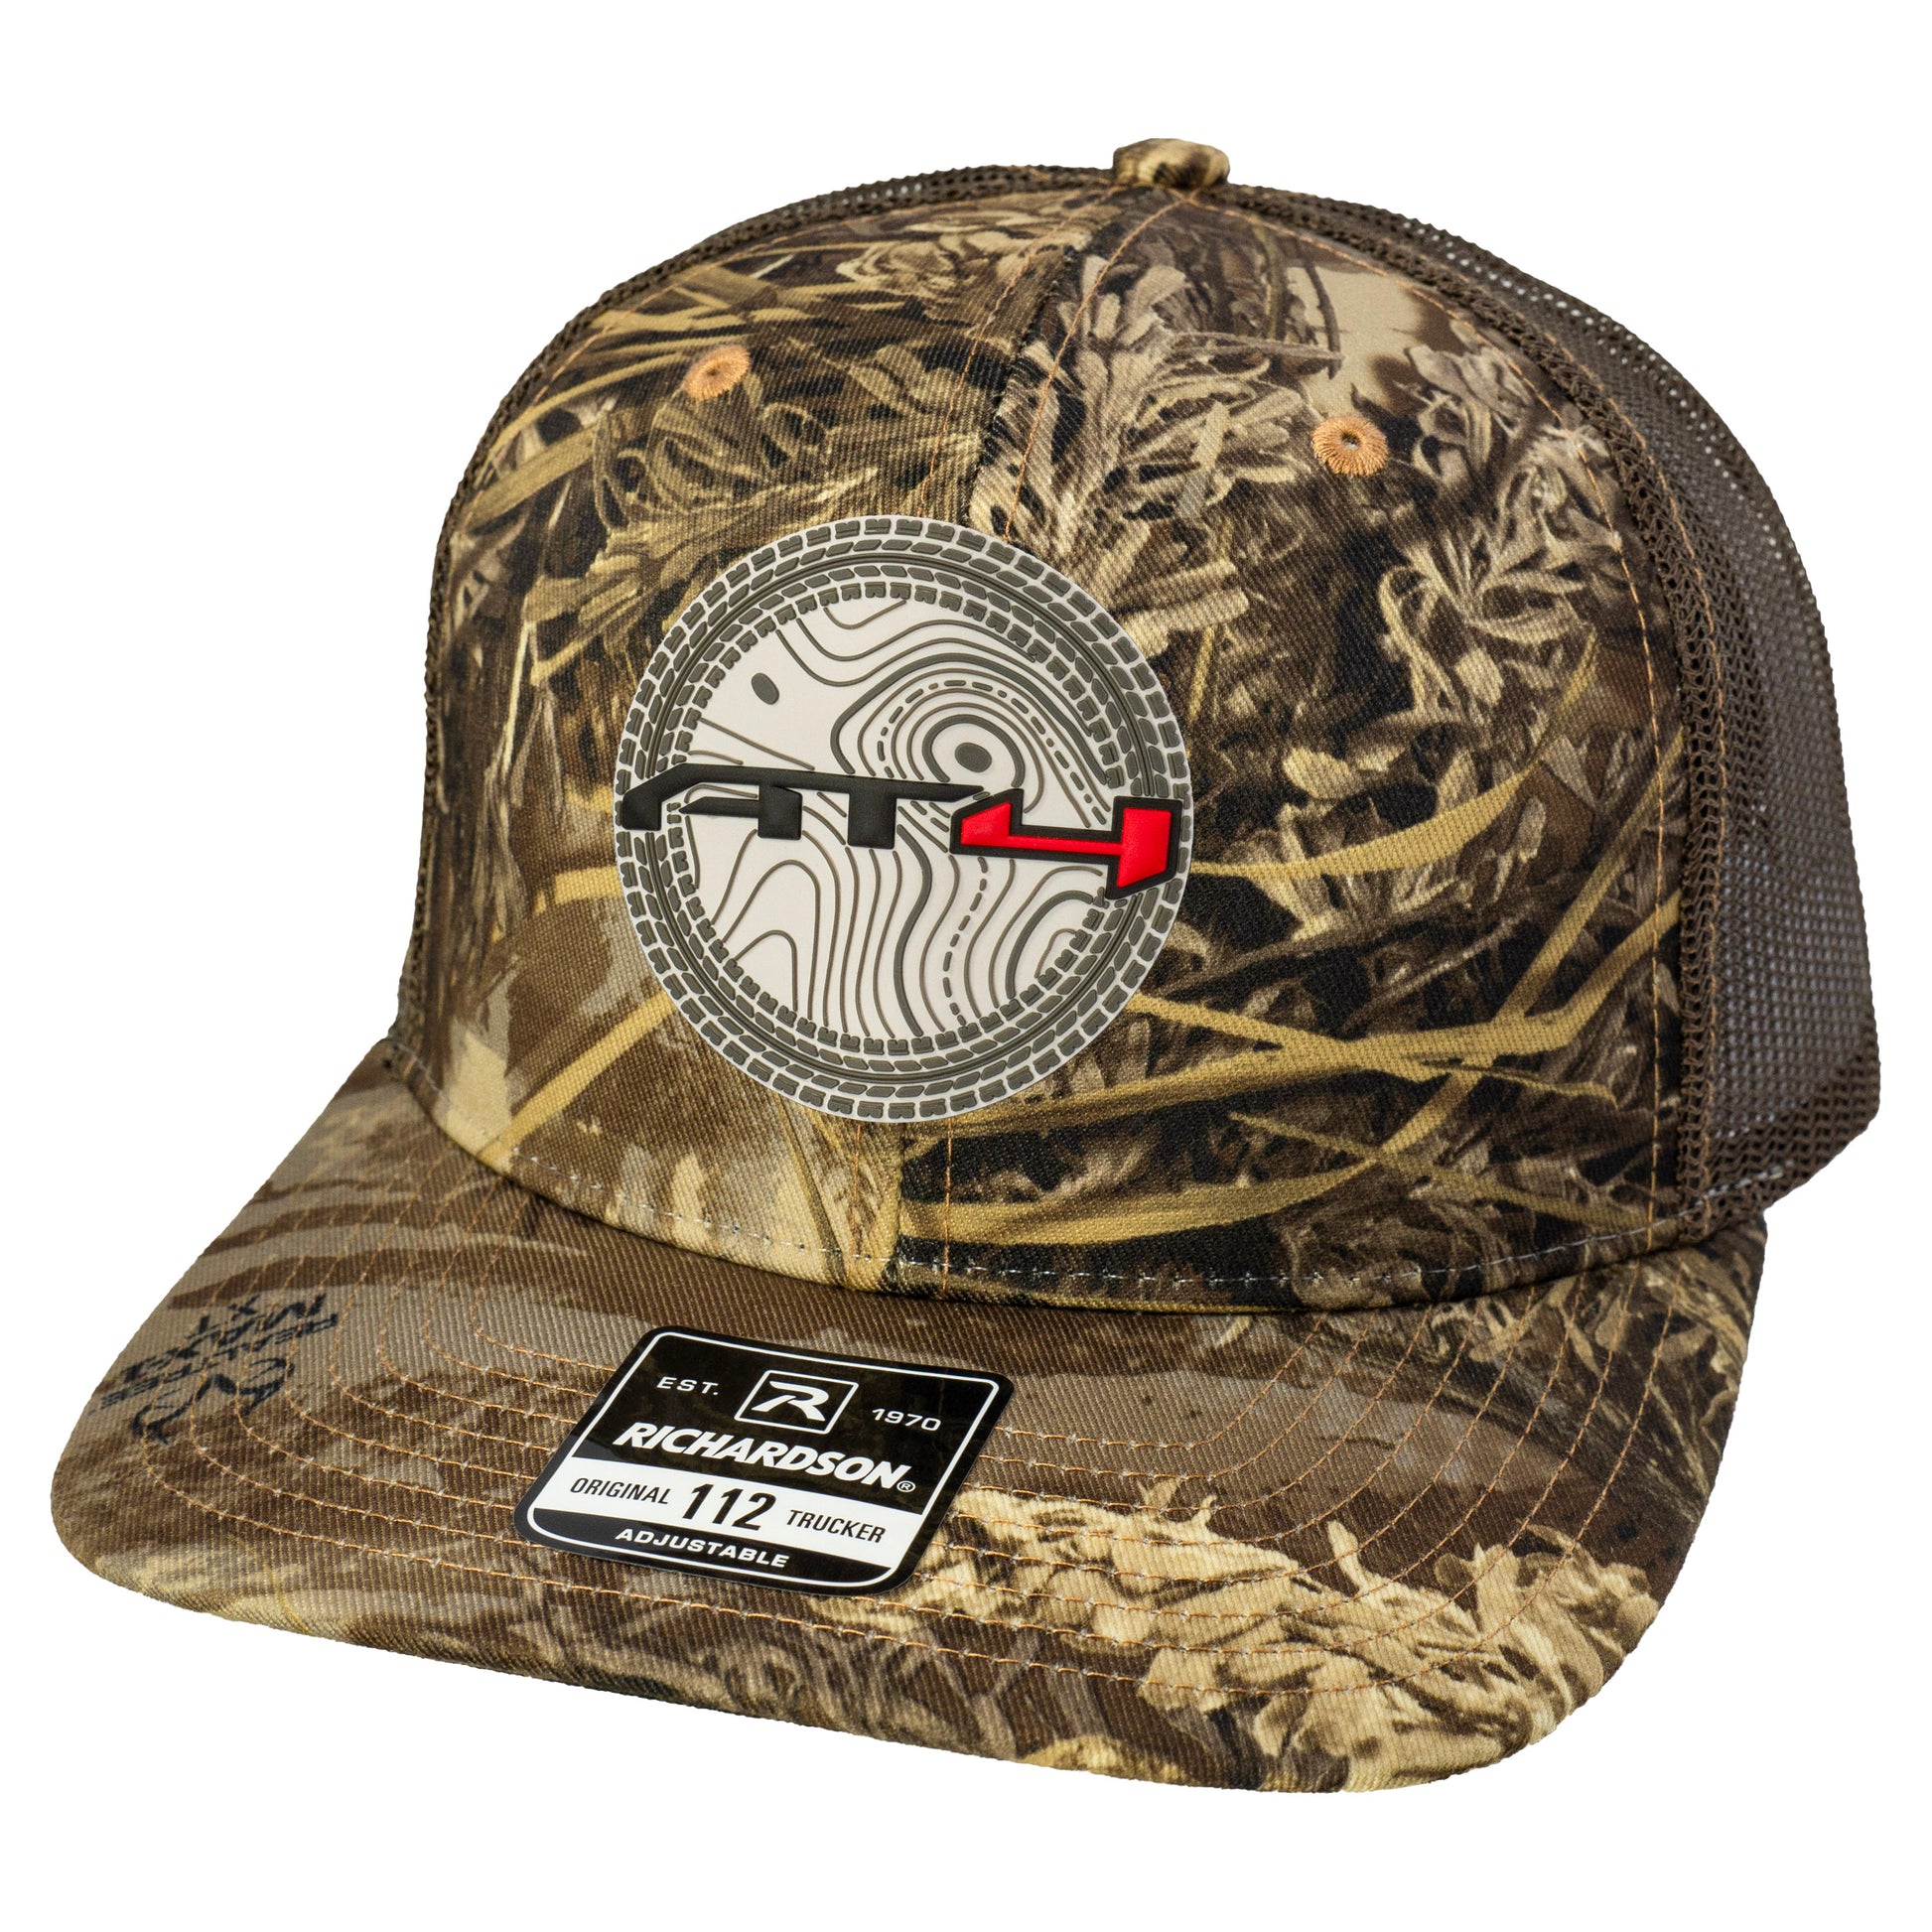 AT4 3D Patterned Snapback Trucker Hat- Realtree Max-1/ Brown - Ten Gallon Hat Co.